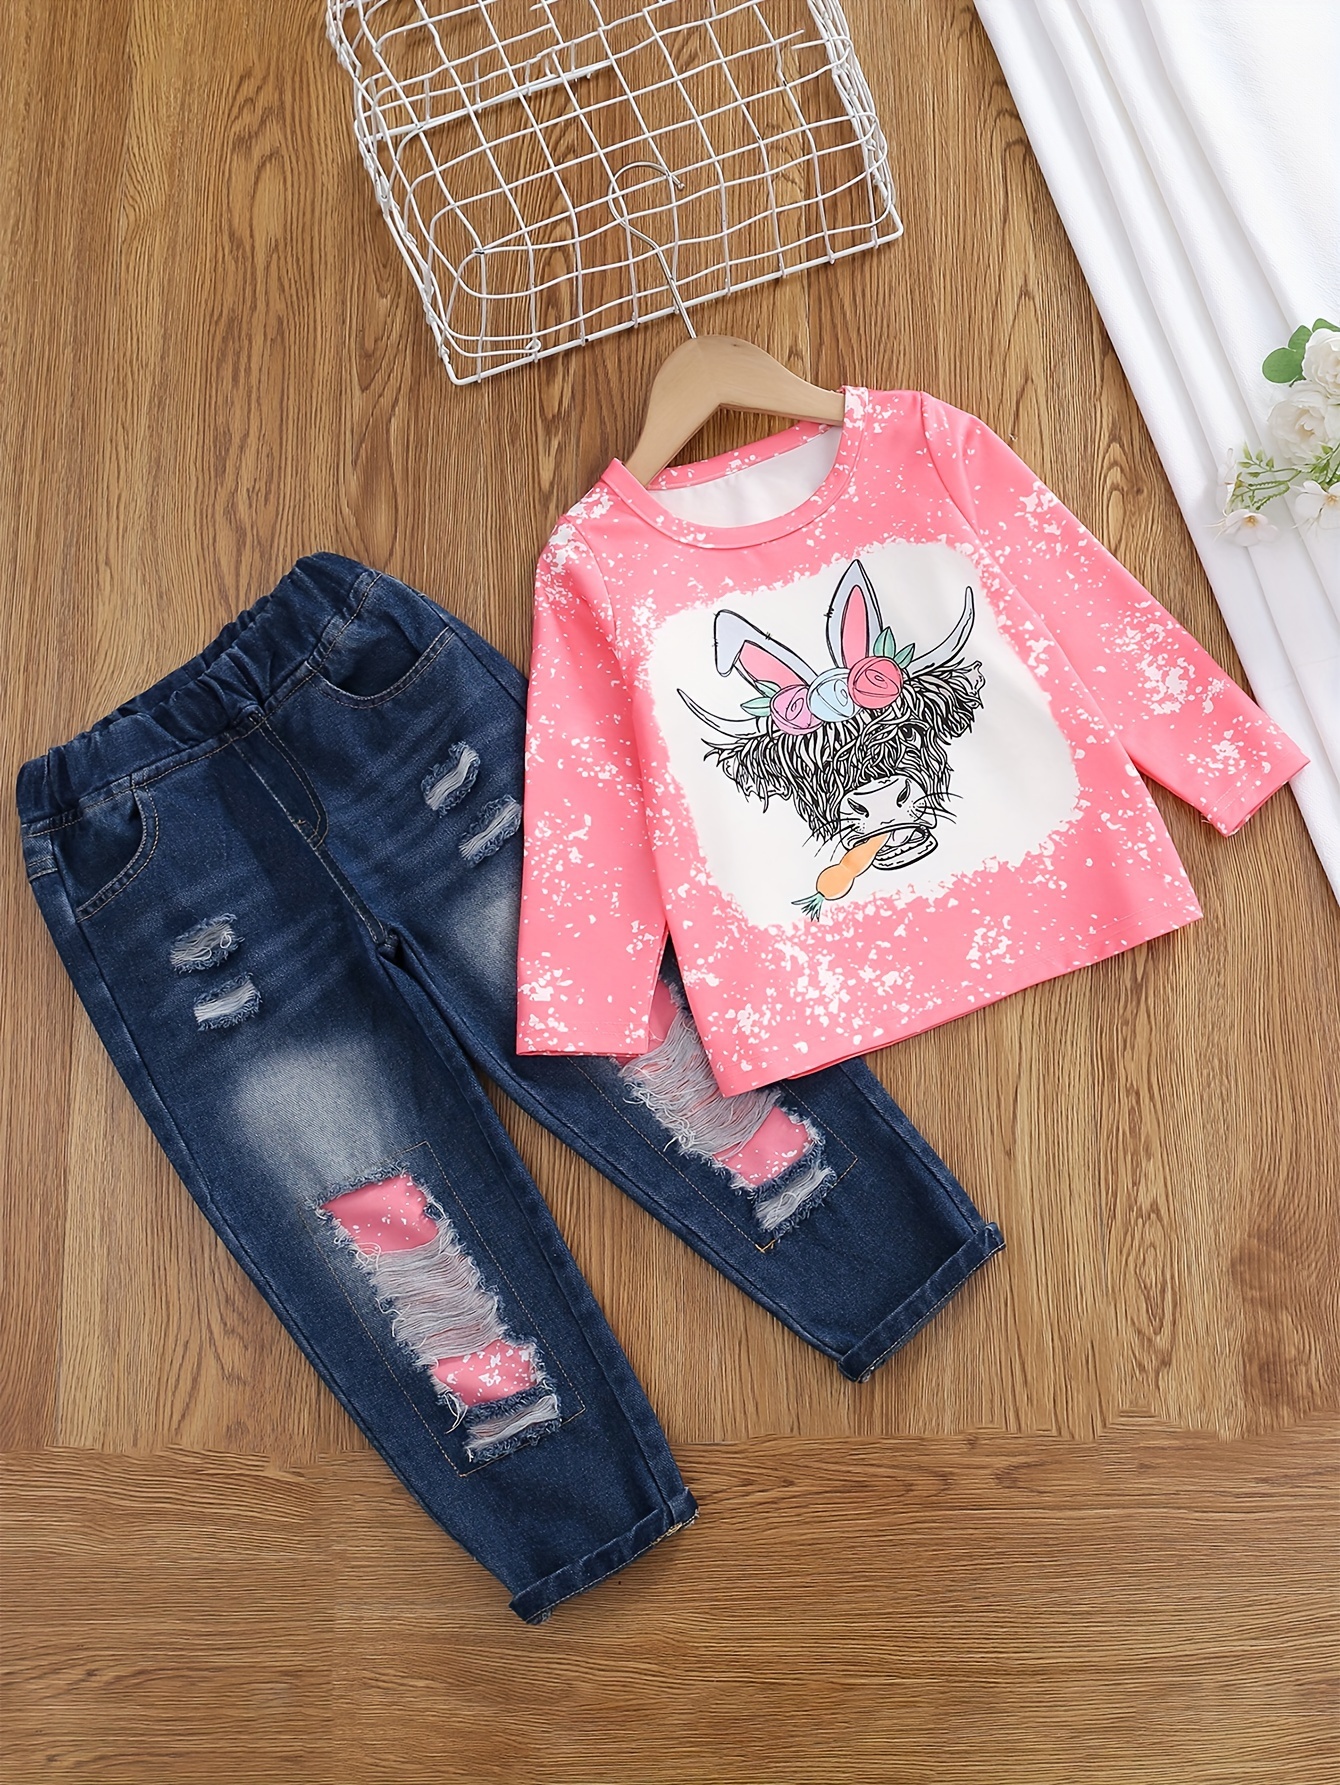 Toddler Girls Outfit WHITE L/S TEE SHIRT Round Hem LIGHT PINK JEGGINGS  Pants 3T